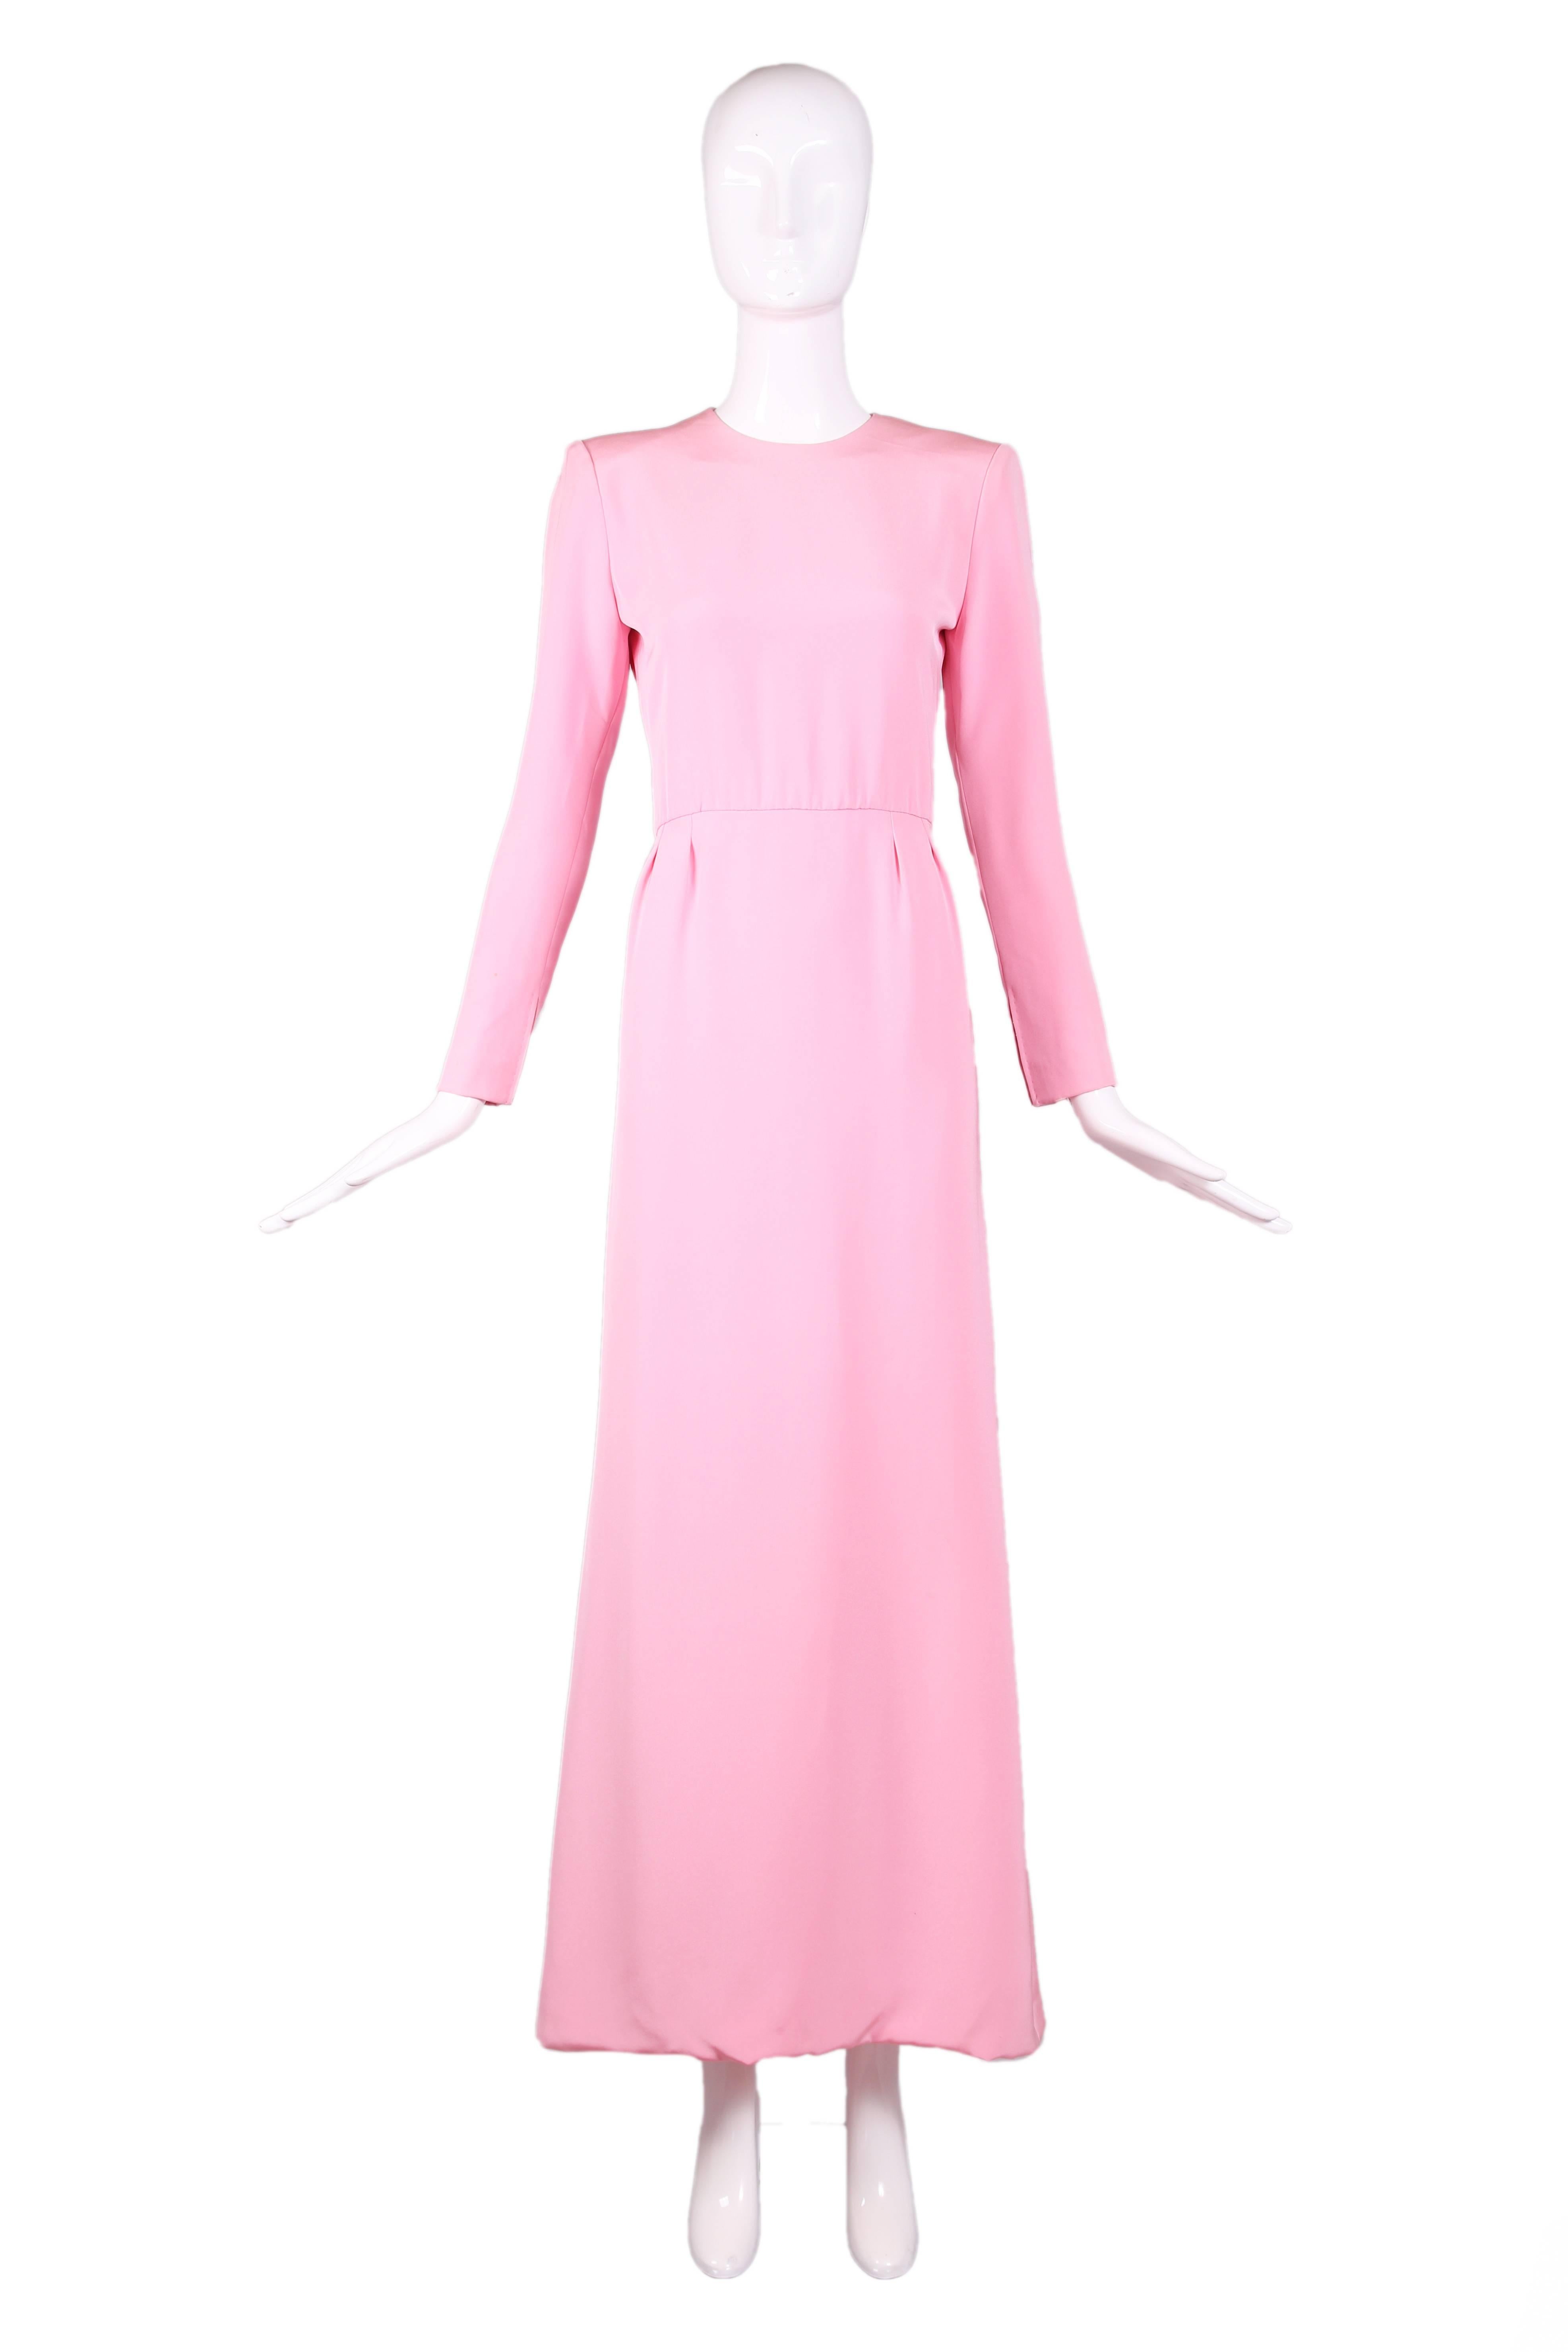 Vintage Pierre Balmain haute couture baby pink silk crepe A-line gown with long sleeves and jewel neckline. Features four pleats at waistline in front and back. Zipper closures both at bodice back and at cuffs. Fully lined in silk. In excellent